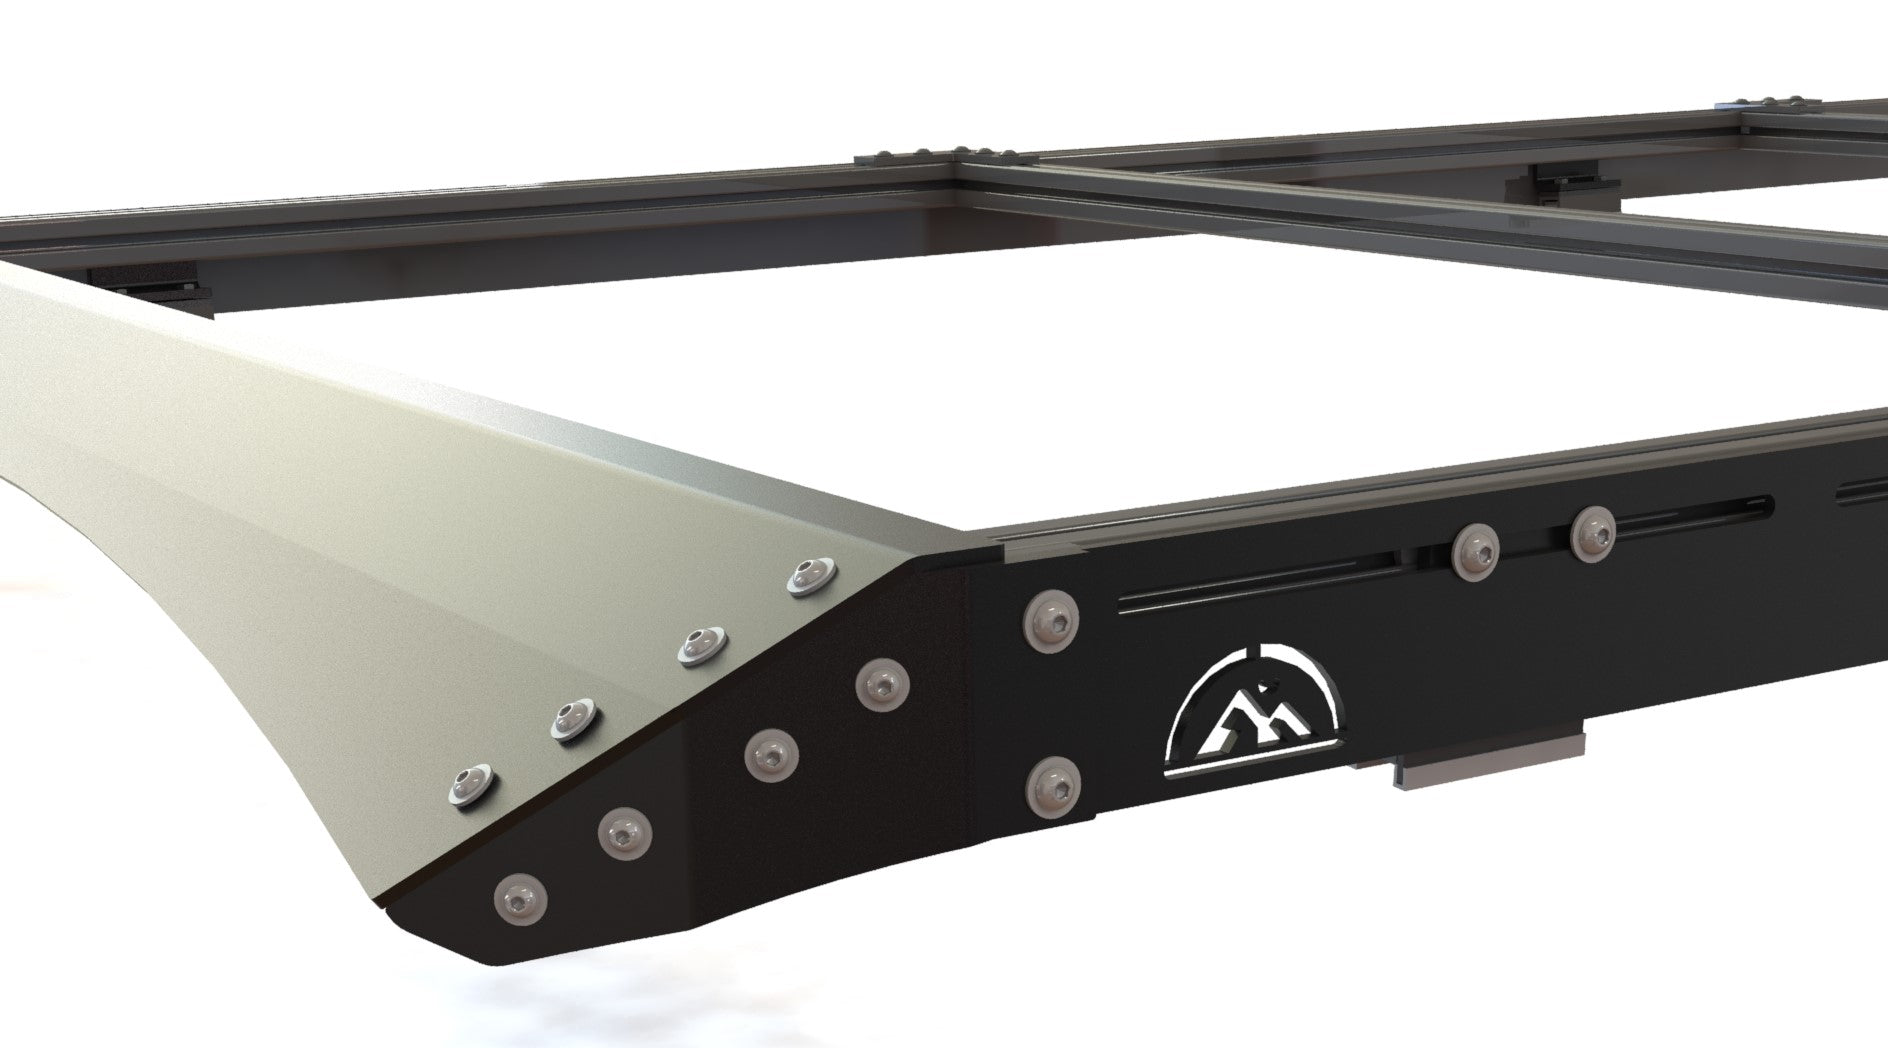 Ram Promaster Roof Rack UPGRADE KIT -  56.75" 8020 TO HSLD